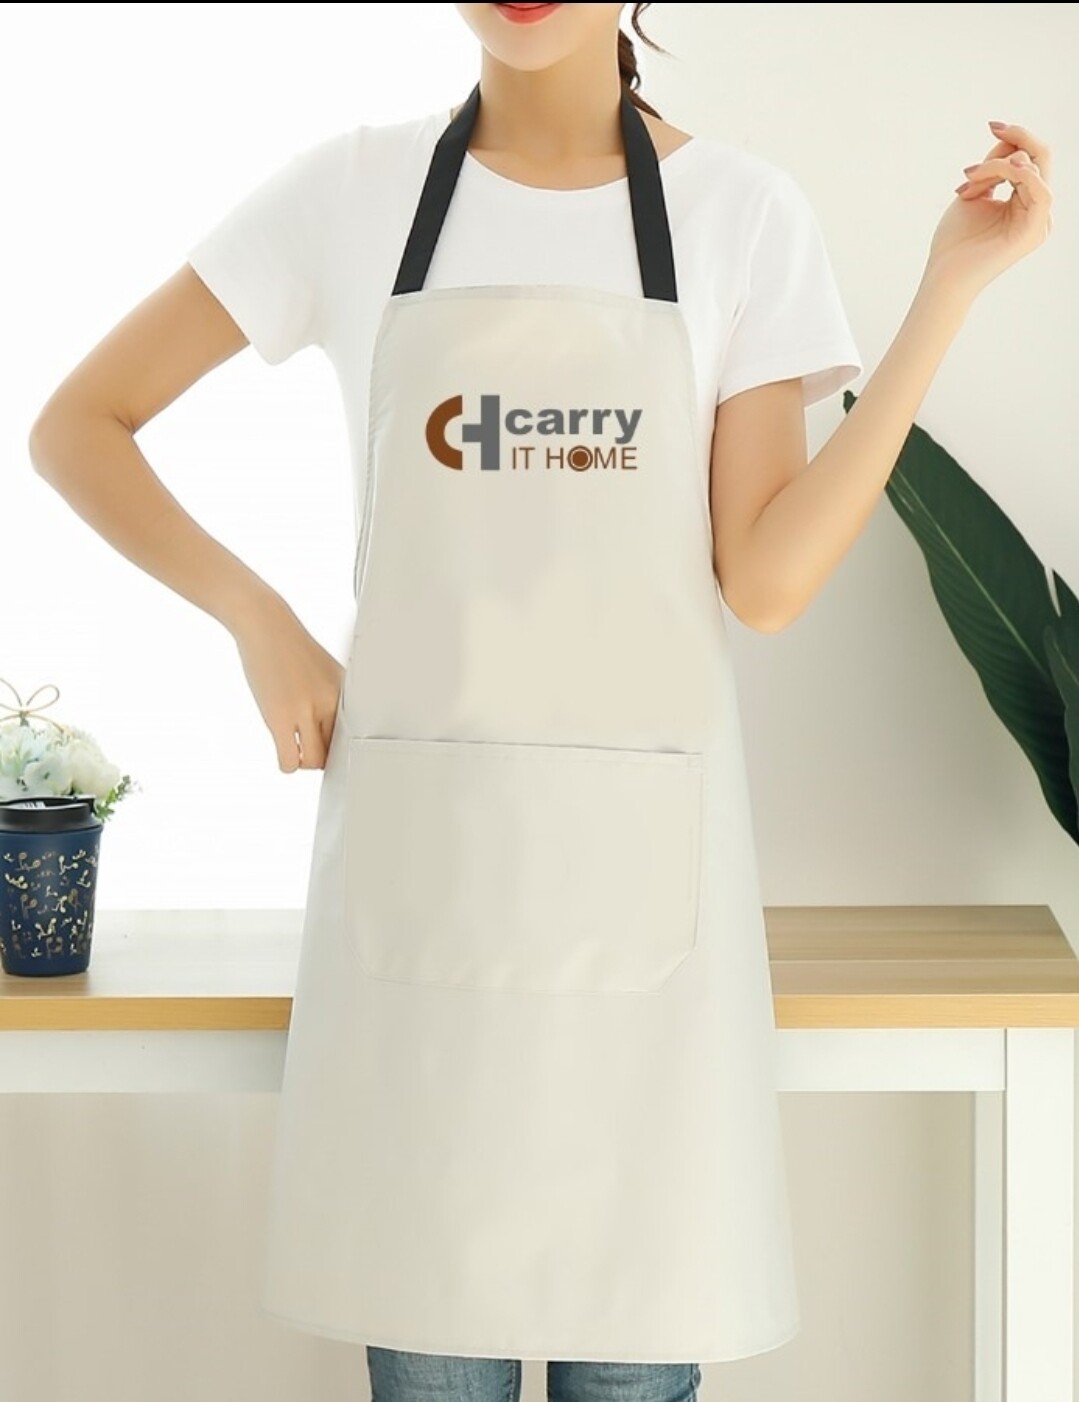 Carry it Home Kitchen Apron. waterproof